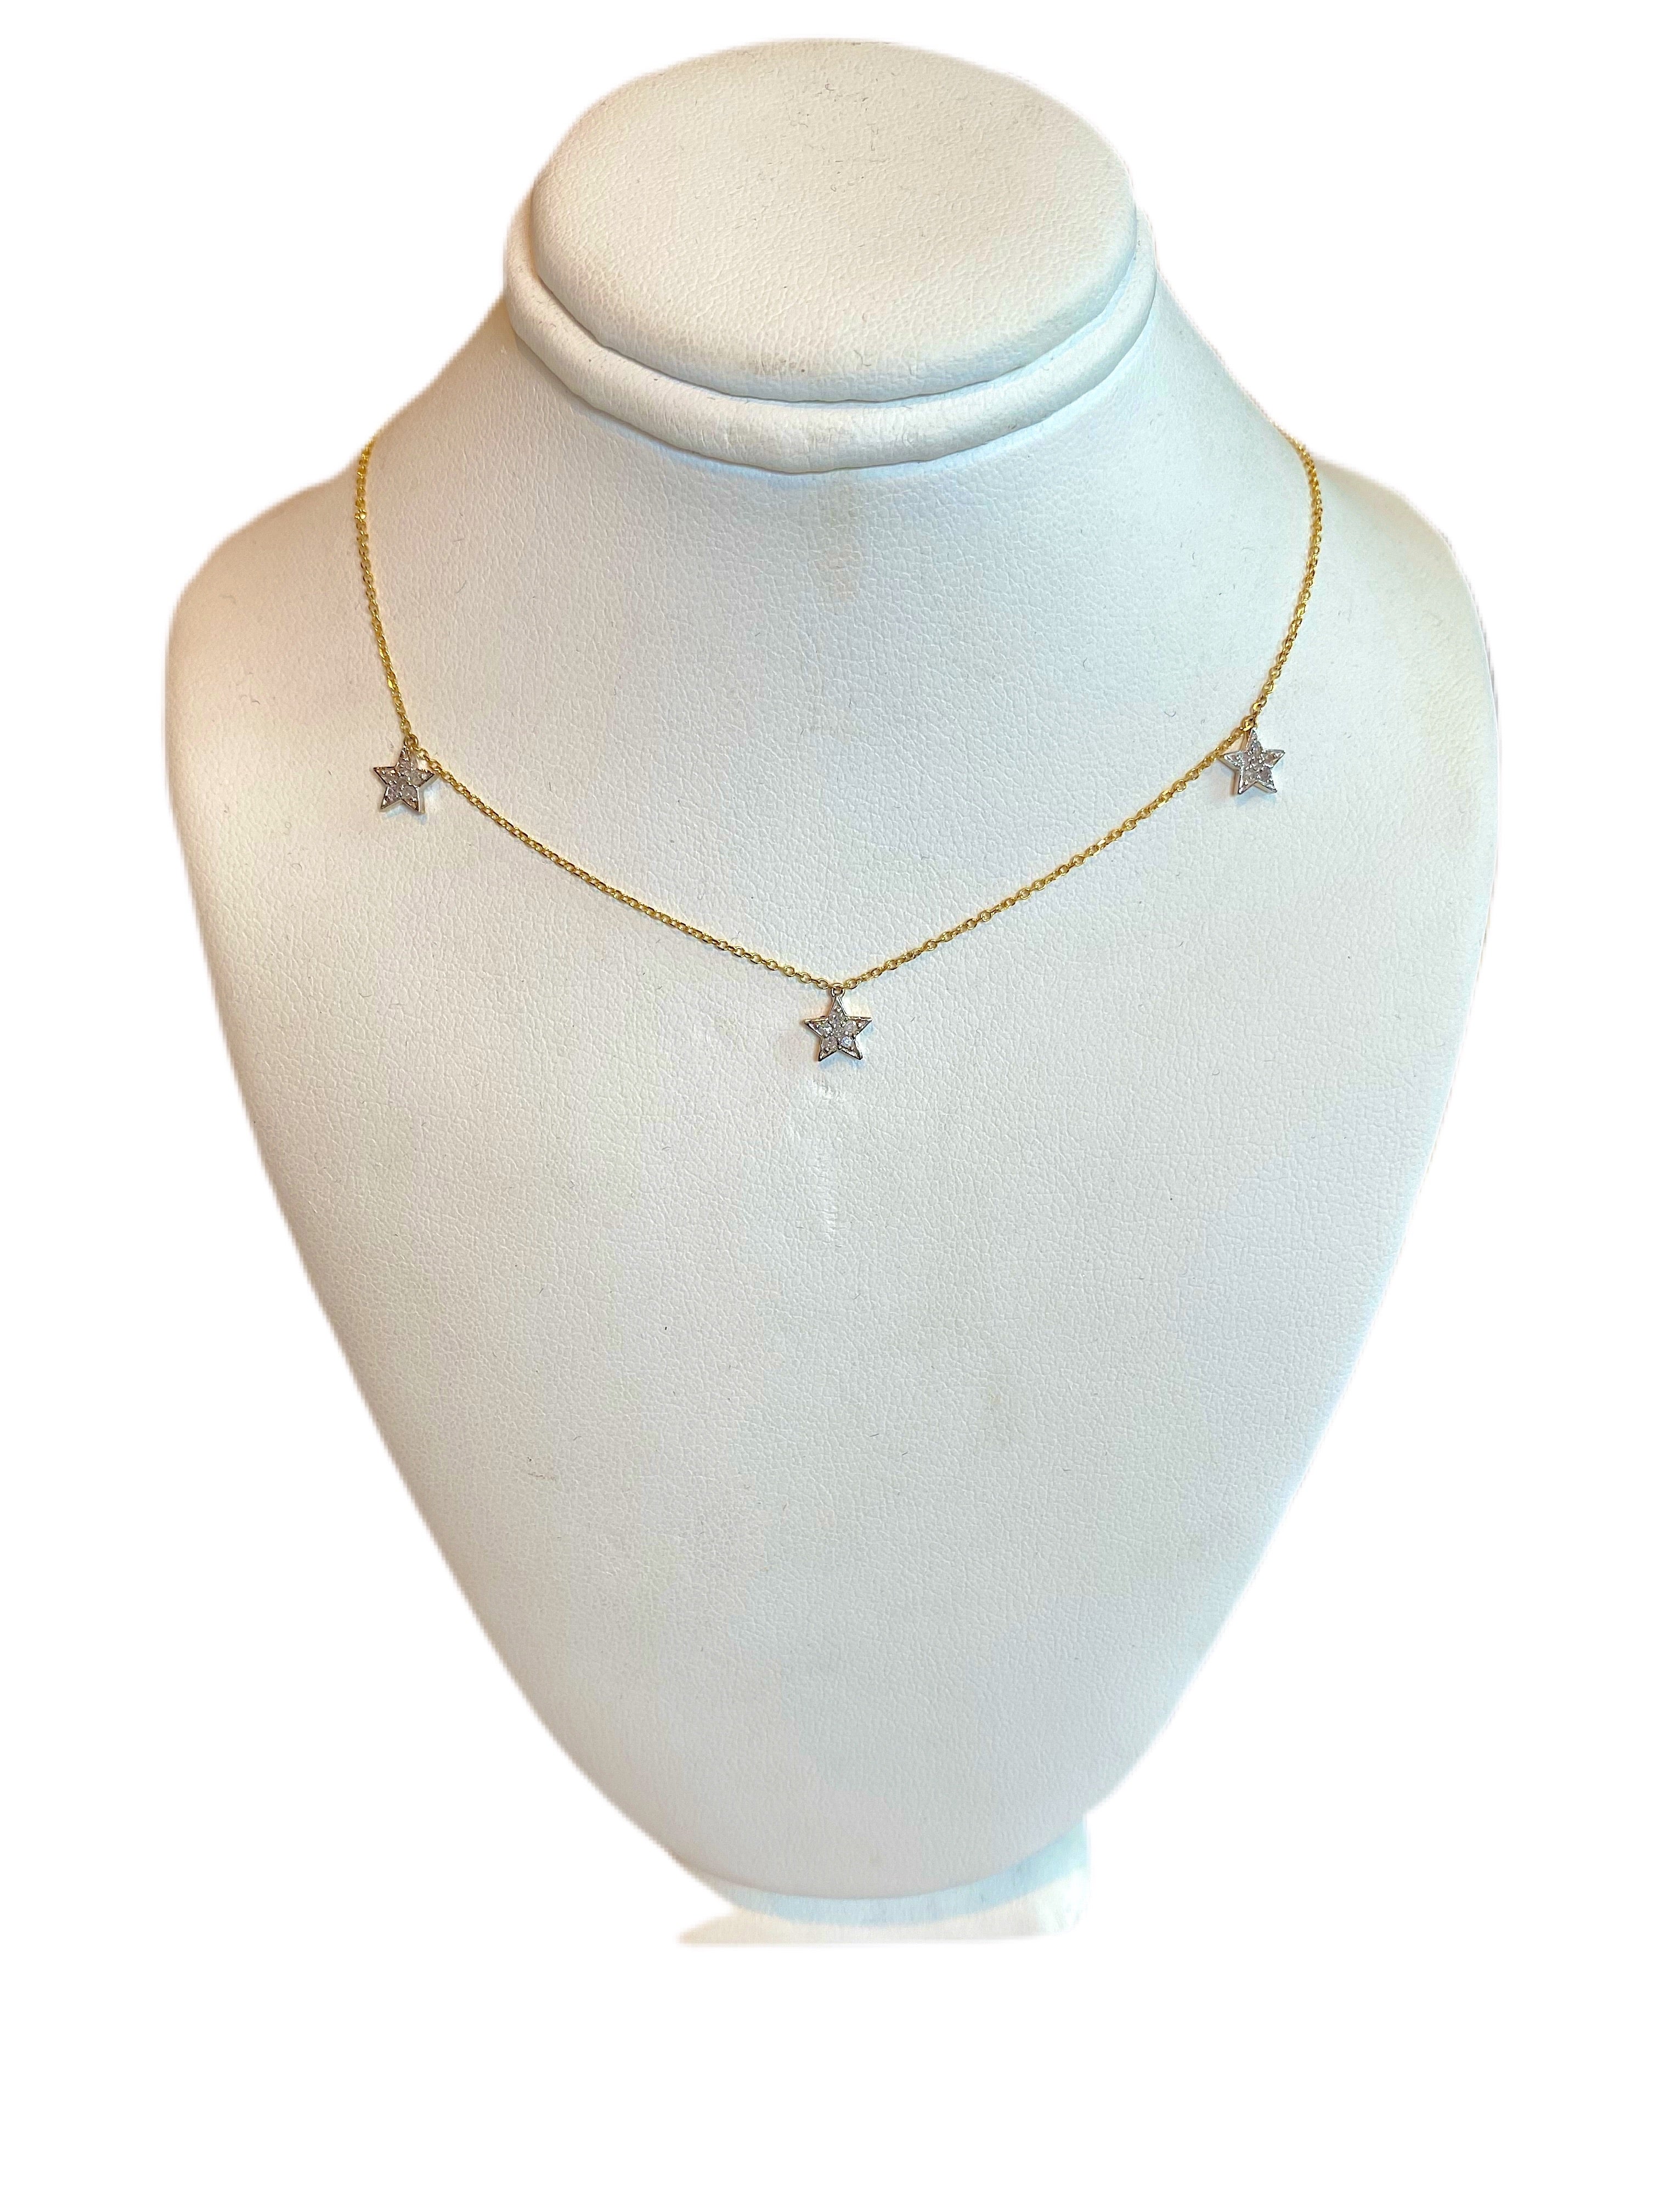 S.Row Designs 14K Gold and Diamond Star Necklace